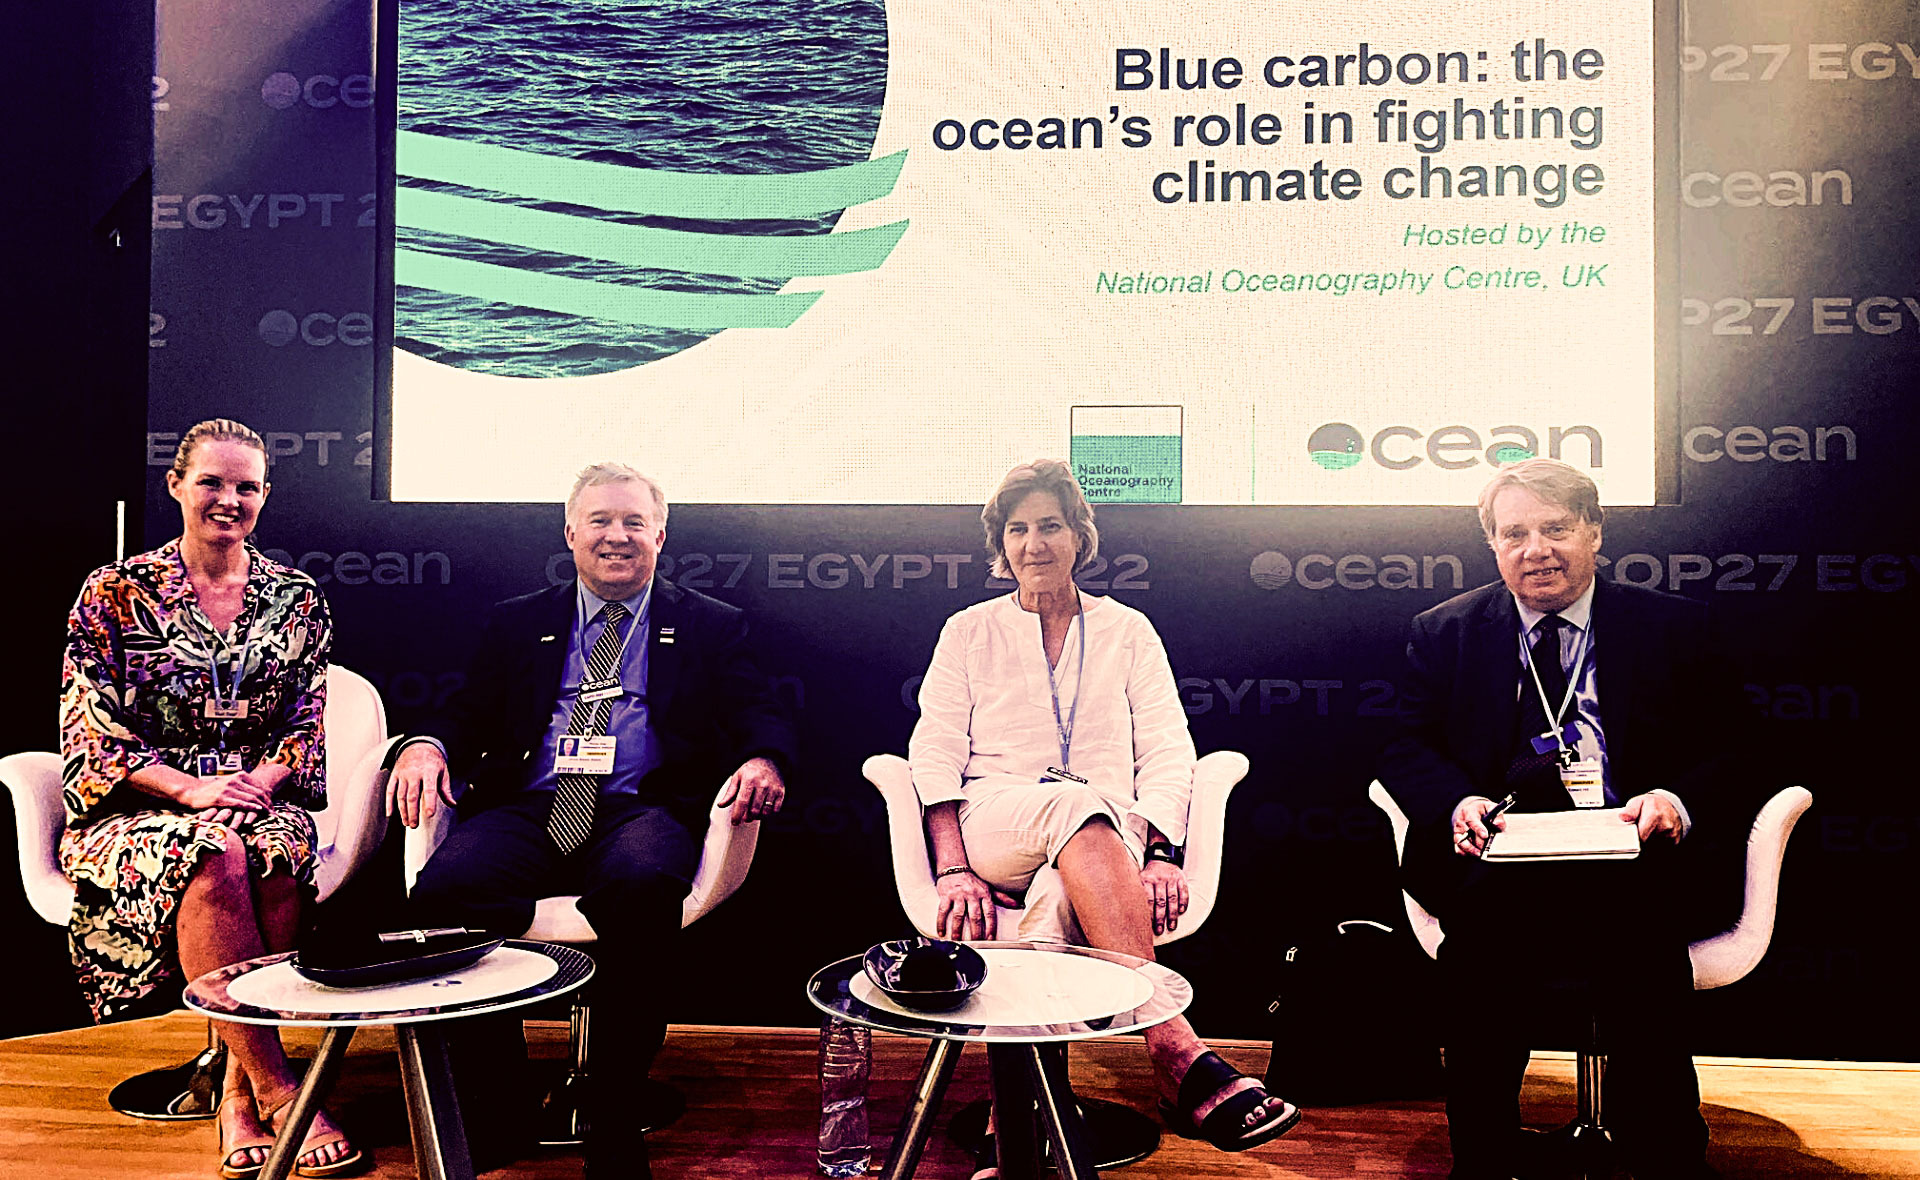 The four speakers of the panel discussion "Blue Carbon: The Ocean’s Role in Fighting Climate Change" at COP27 sitting in front of screen showing a slideshow. From left to right: Dr Narissa Bax (Researcher, University of Tasmania), Dr James Edson (Senior Scientist, WHOI), Dr Anya Waite (CEO of OFI Canada) and Professor Ed Hill, (Chief Executive Officer NOC).The following text is written on the slide behind them: Blue Carbon: The Ocean’s Role in Fighting Climate Change, hosted by the National Oceanography Centre, UK.